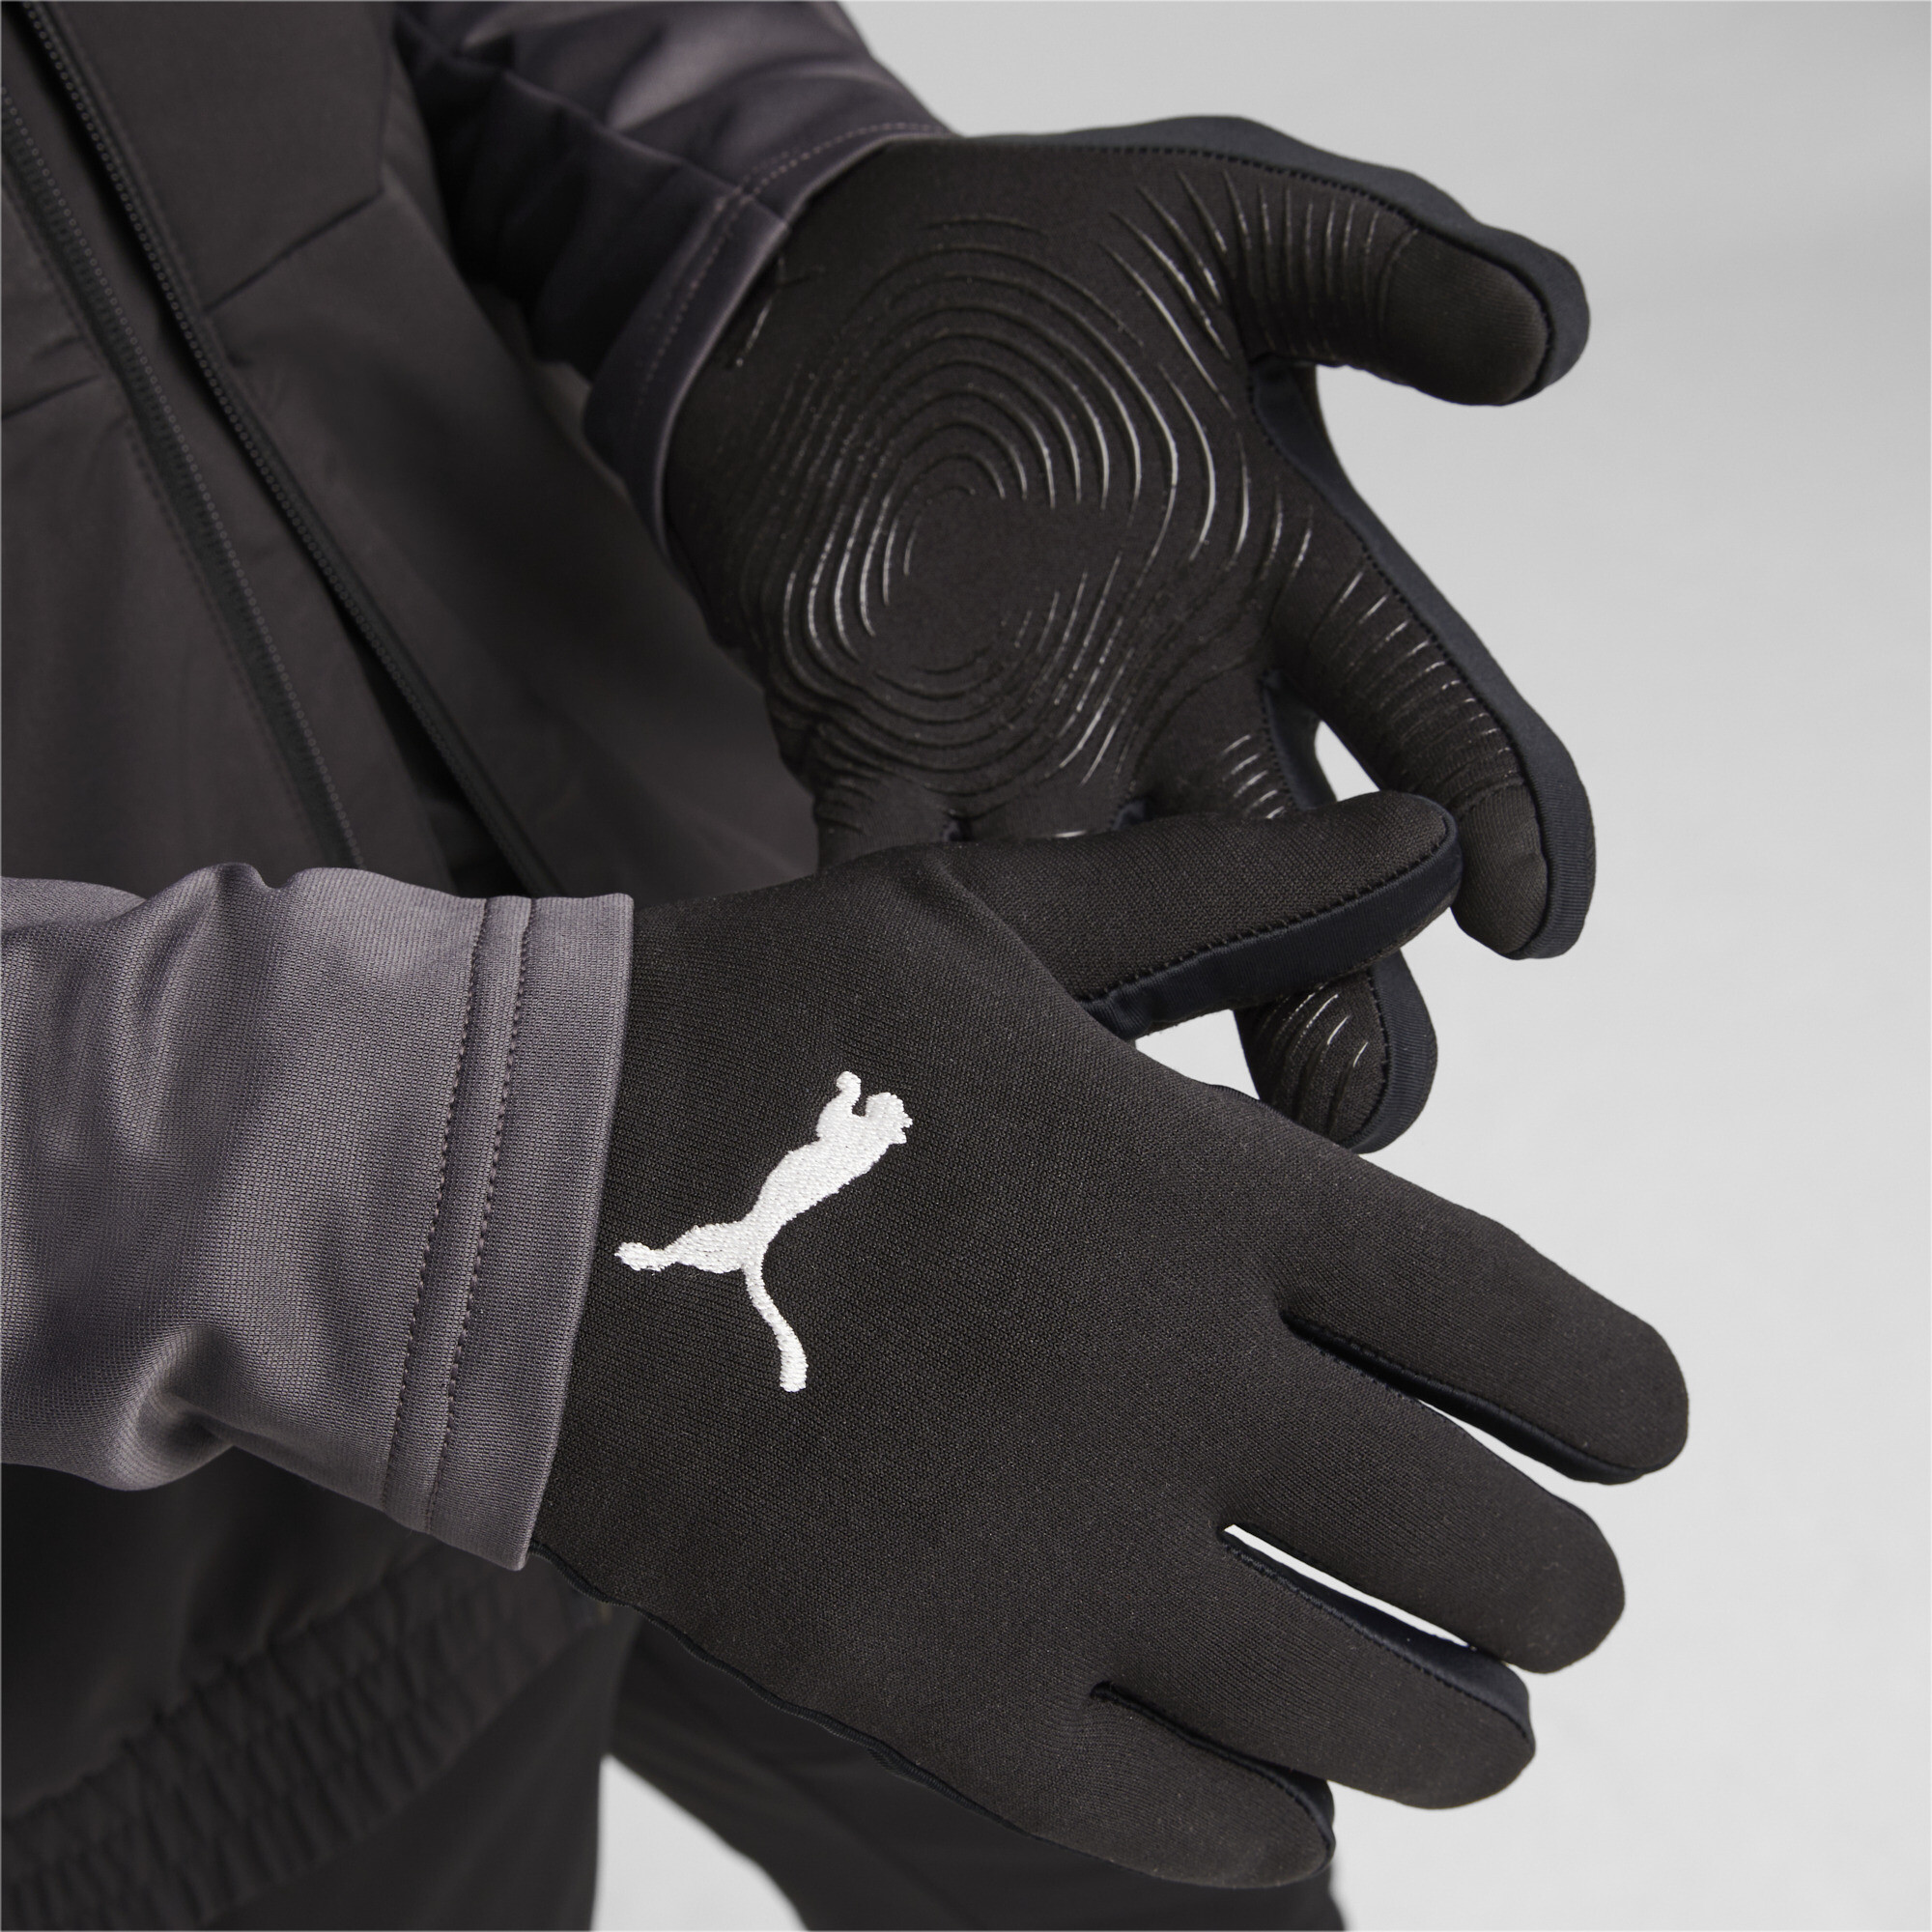 Puma Individual WINTERIZED Football Gloves, Black, Size S, Accessories